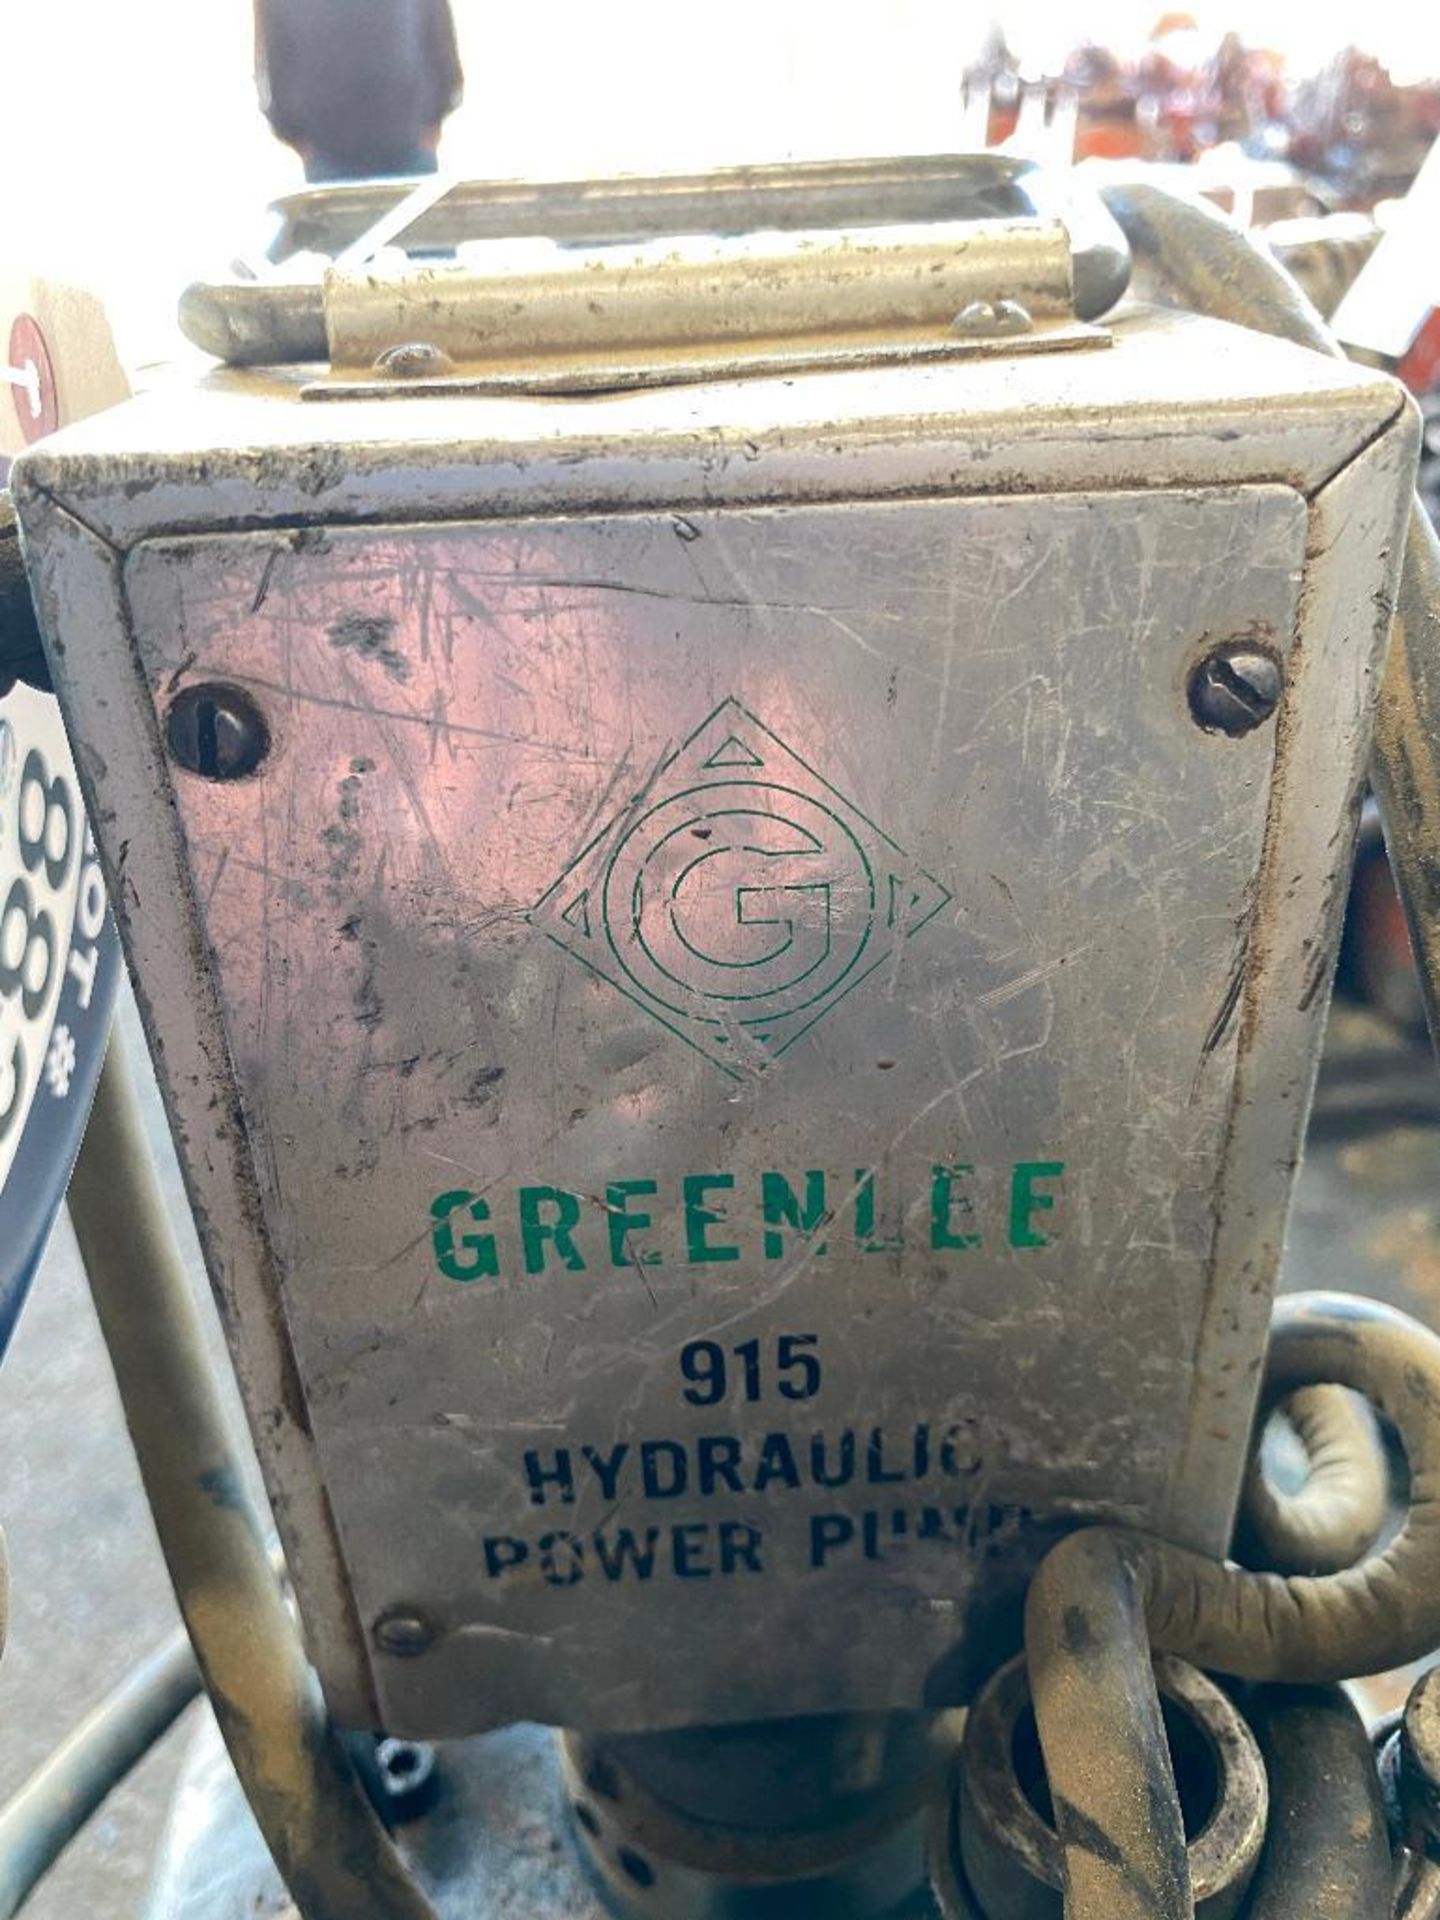 Greenlee 915 Hydraulic Power Pack - Image 4 of 4